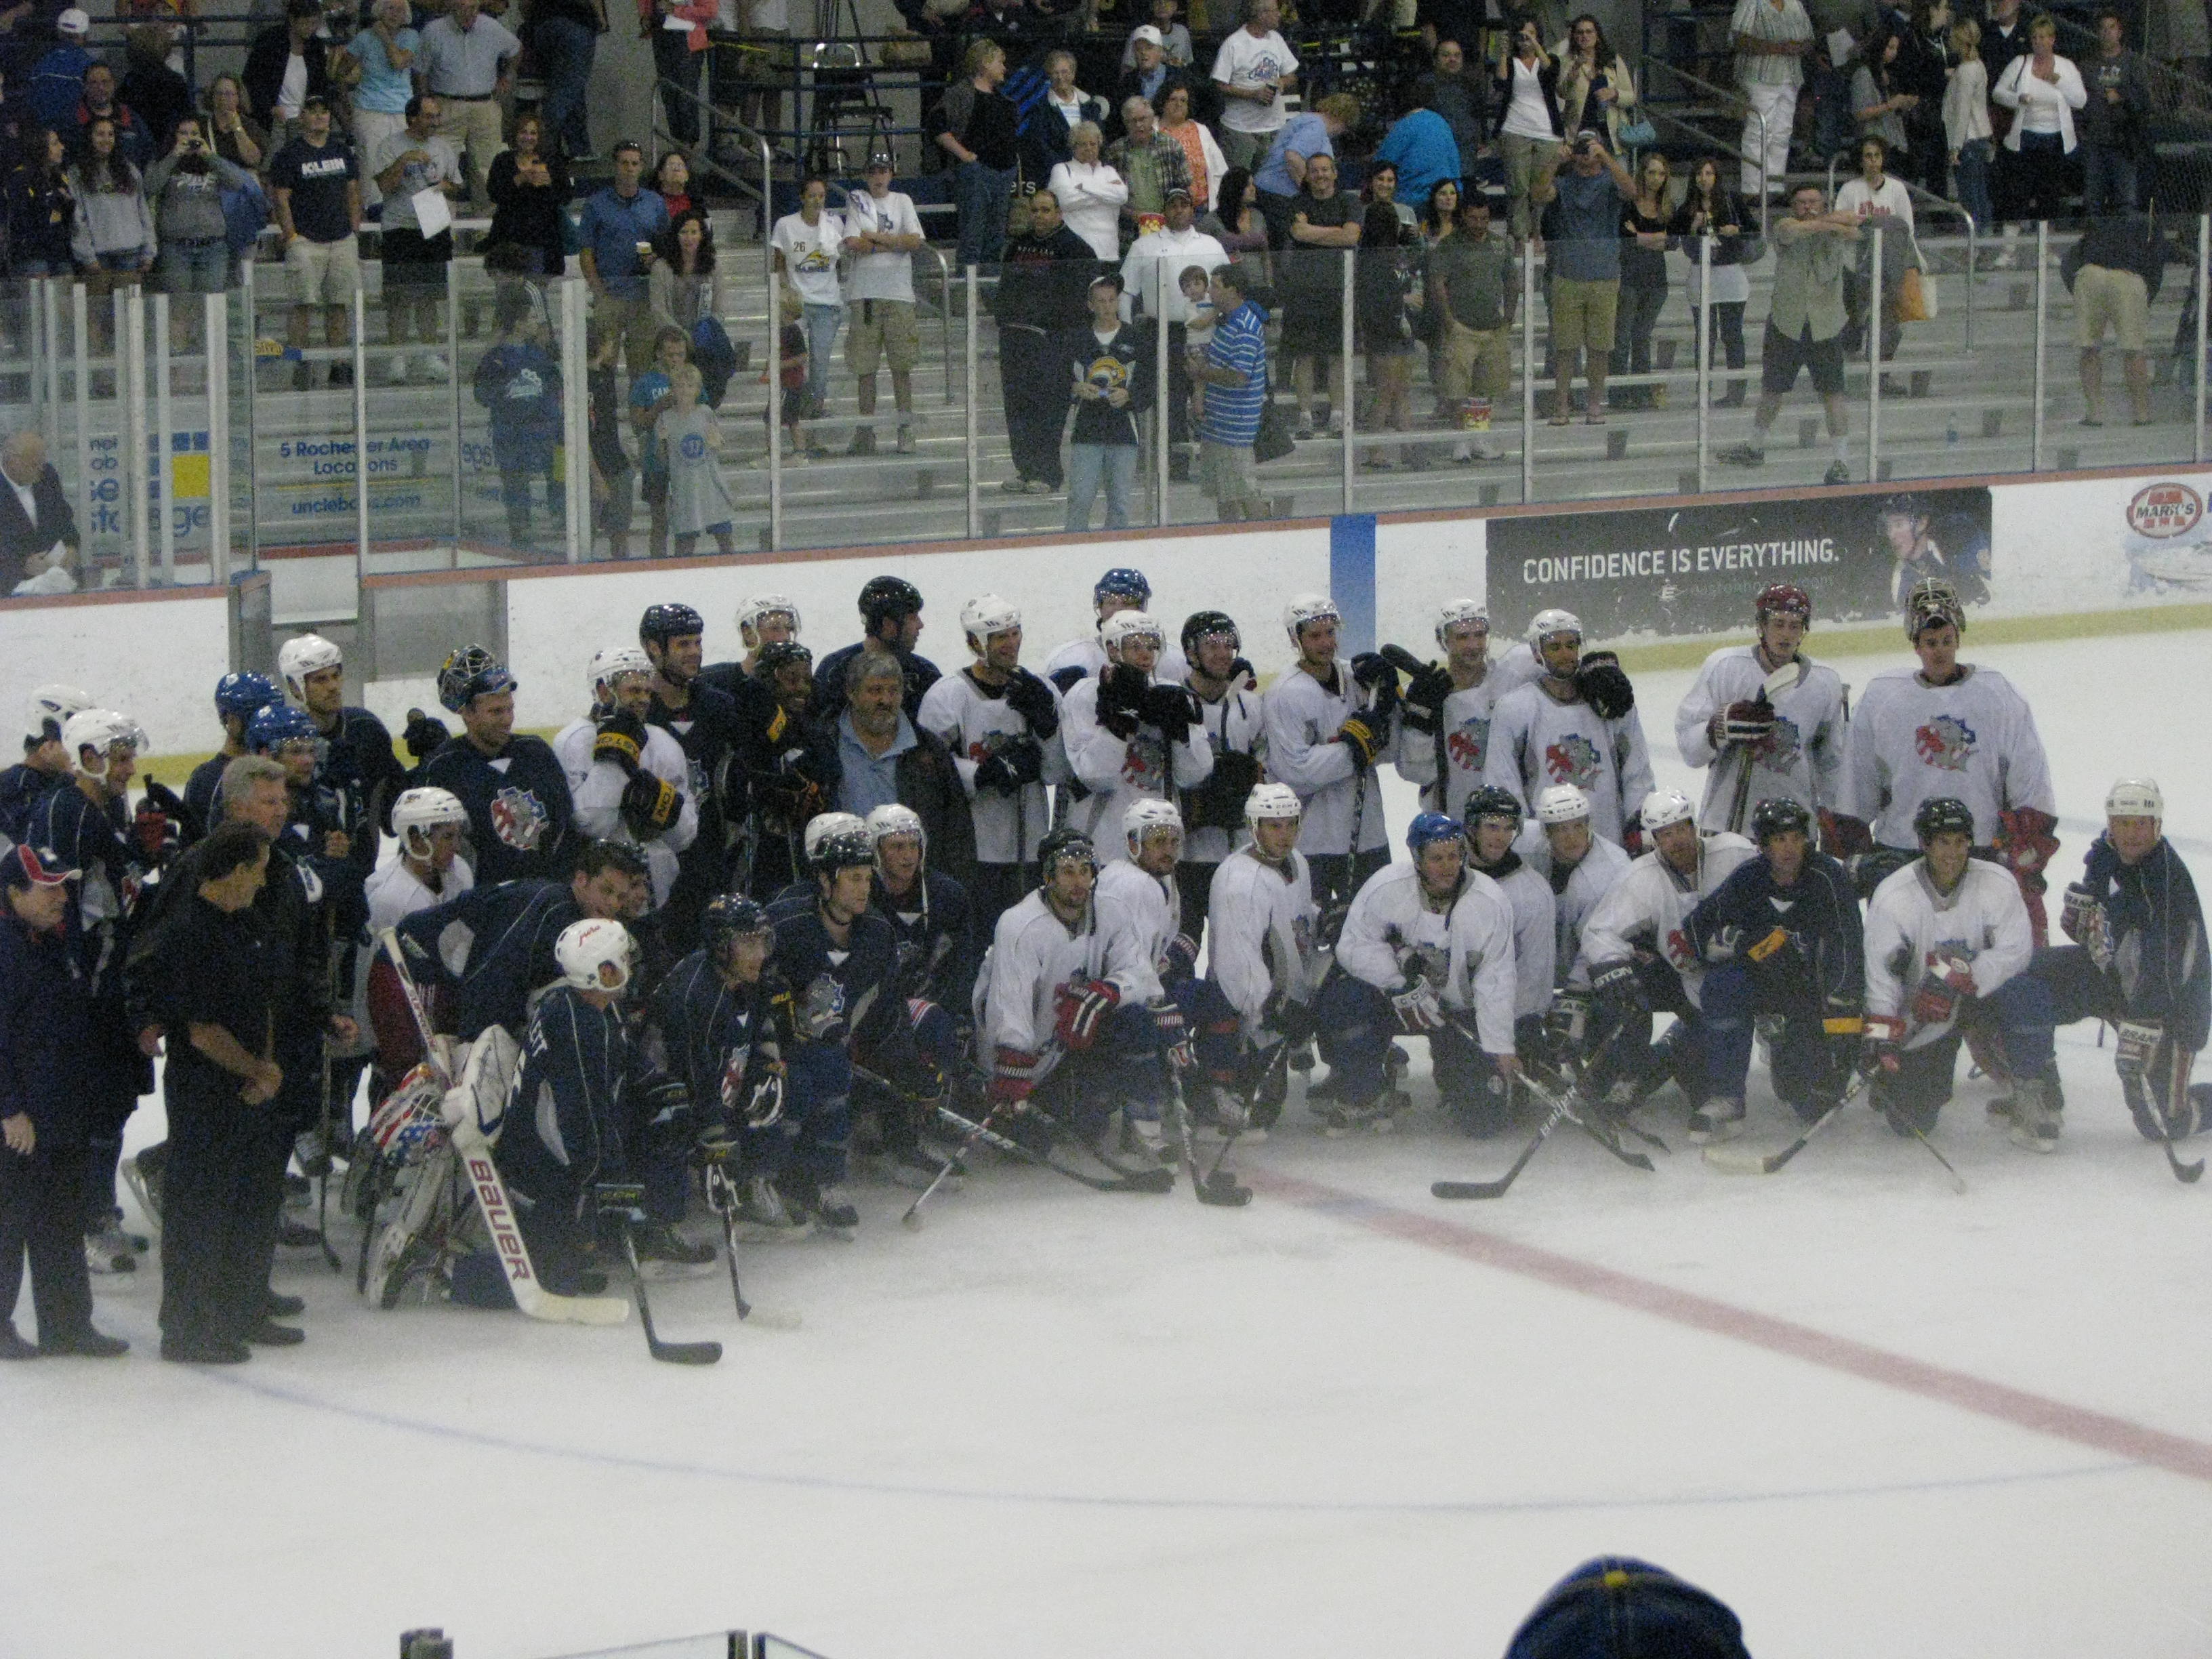 Tortorella, Nichol, Biron and Highlights from the Sharky Memorial Classic